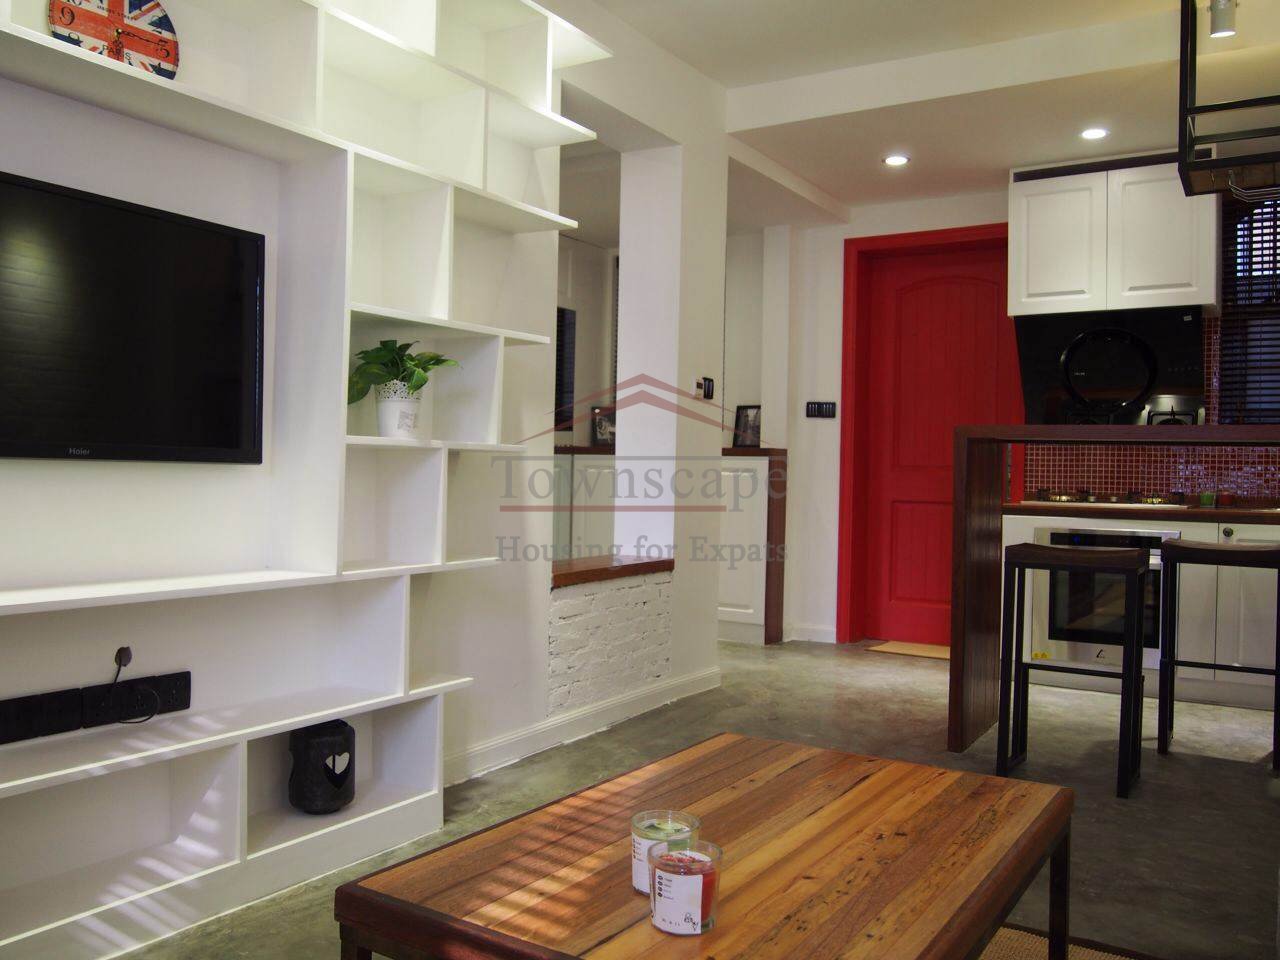 Fantastic 1 BR Lane house for rent in Jing An area